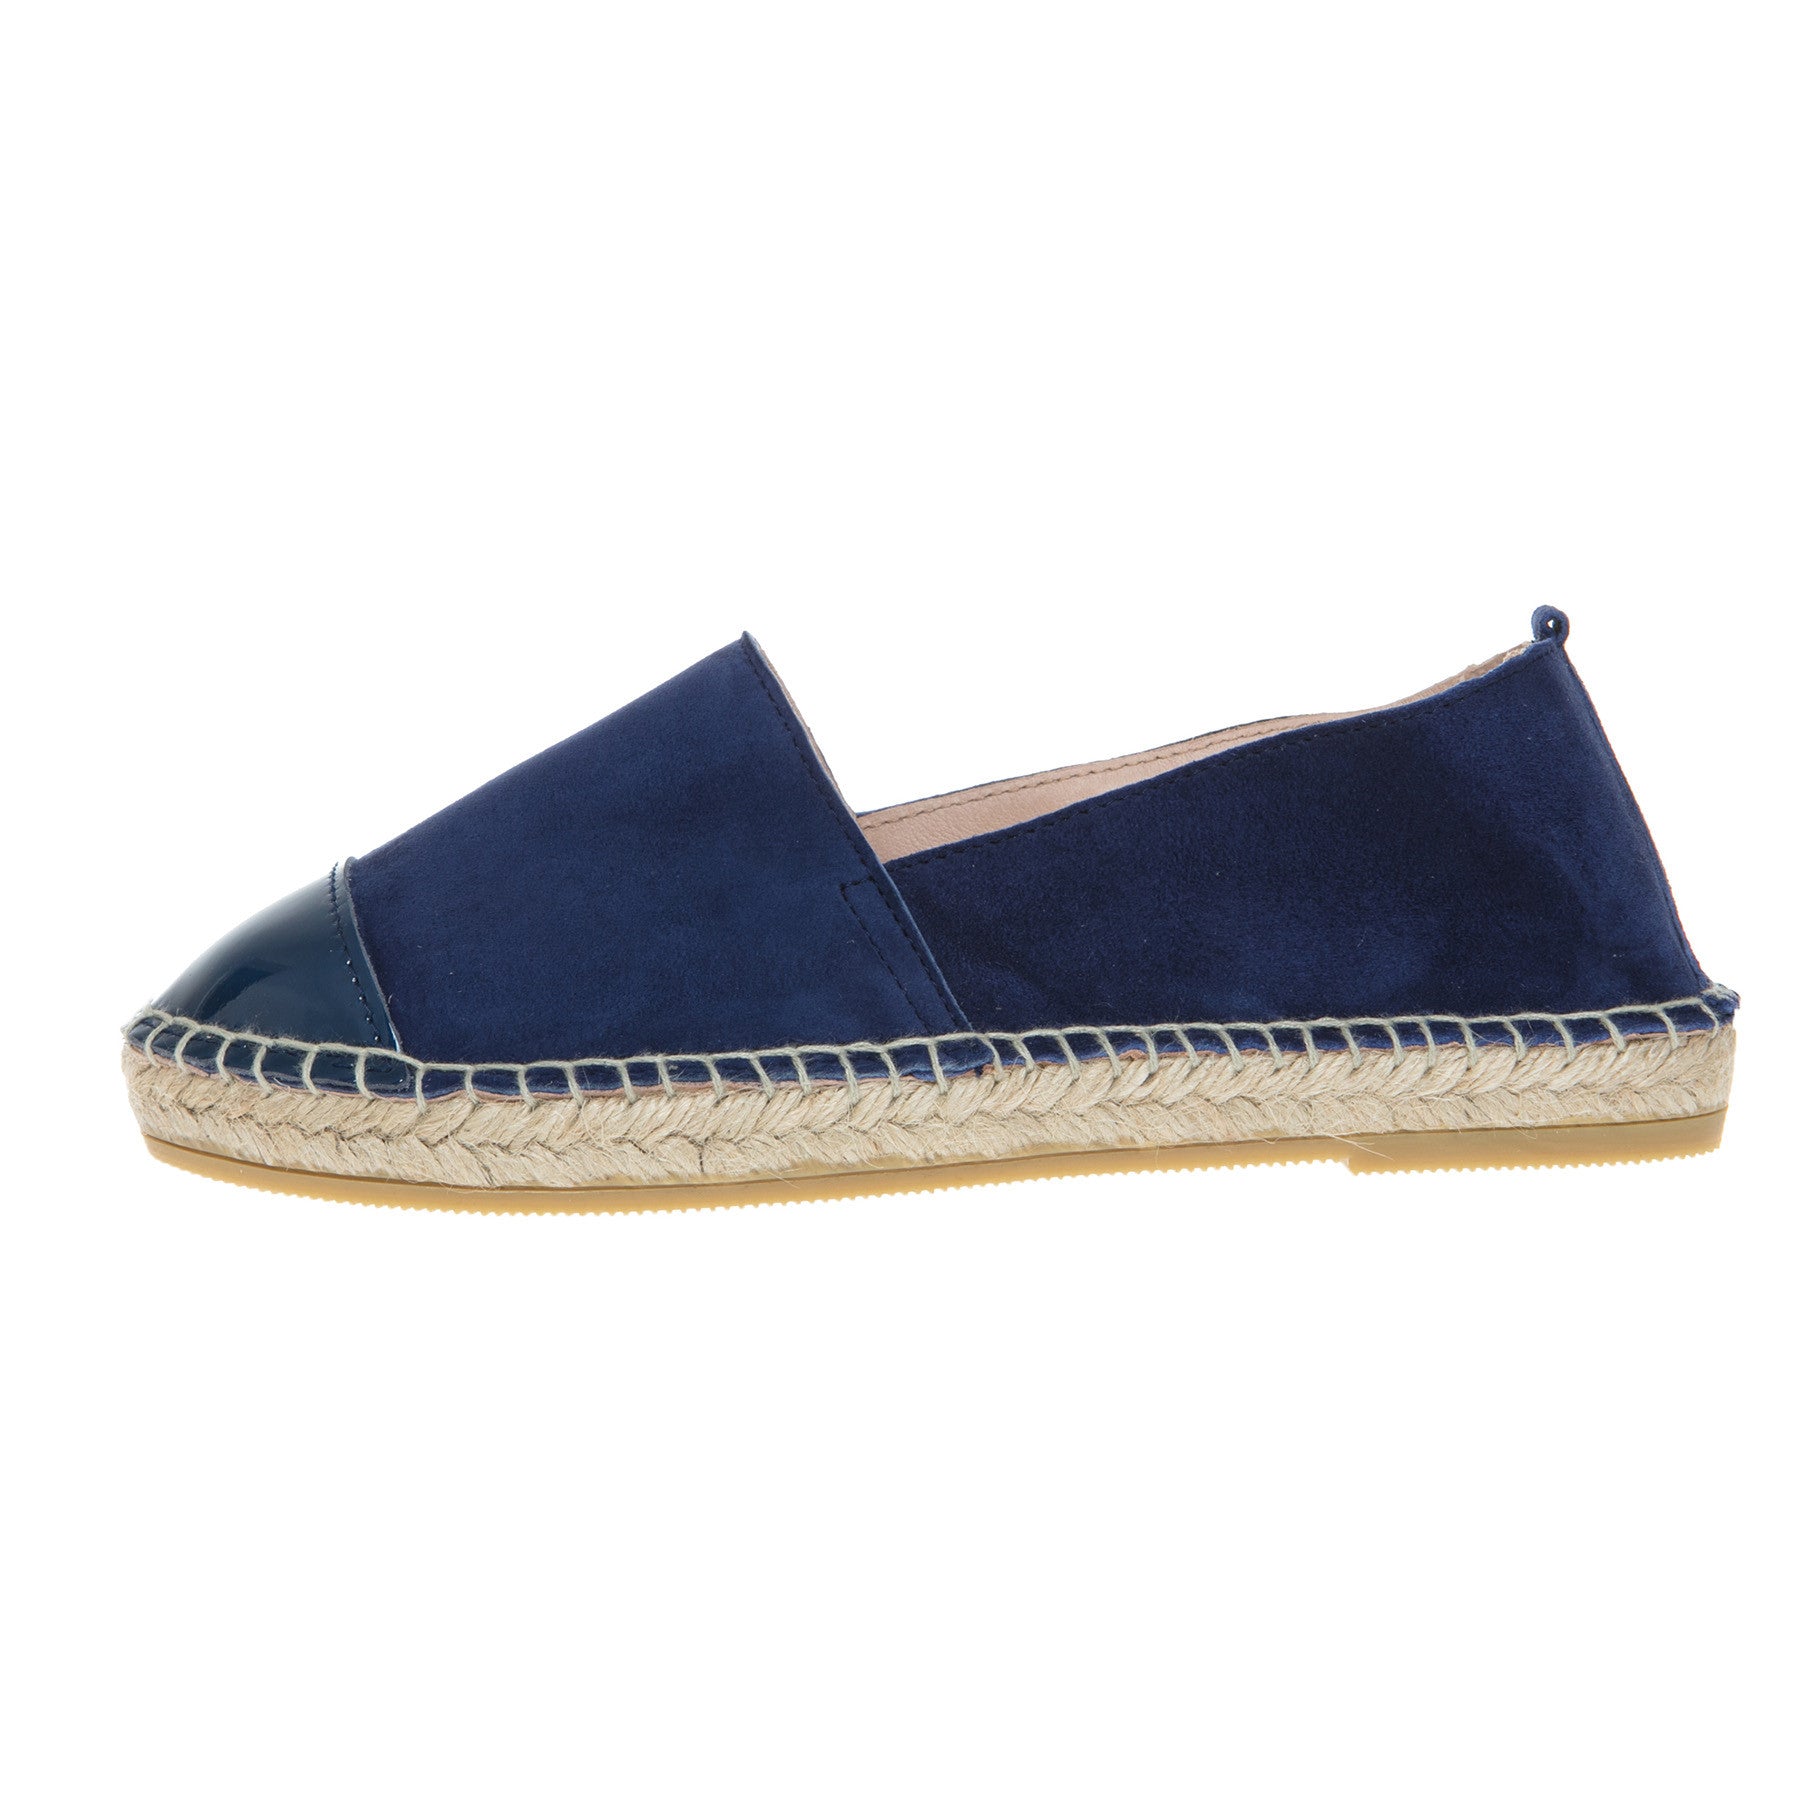 LEO Espadrilles Navy blue suede and 